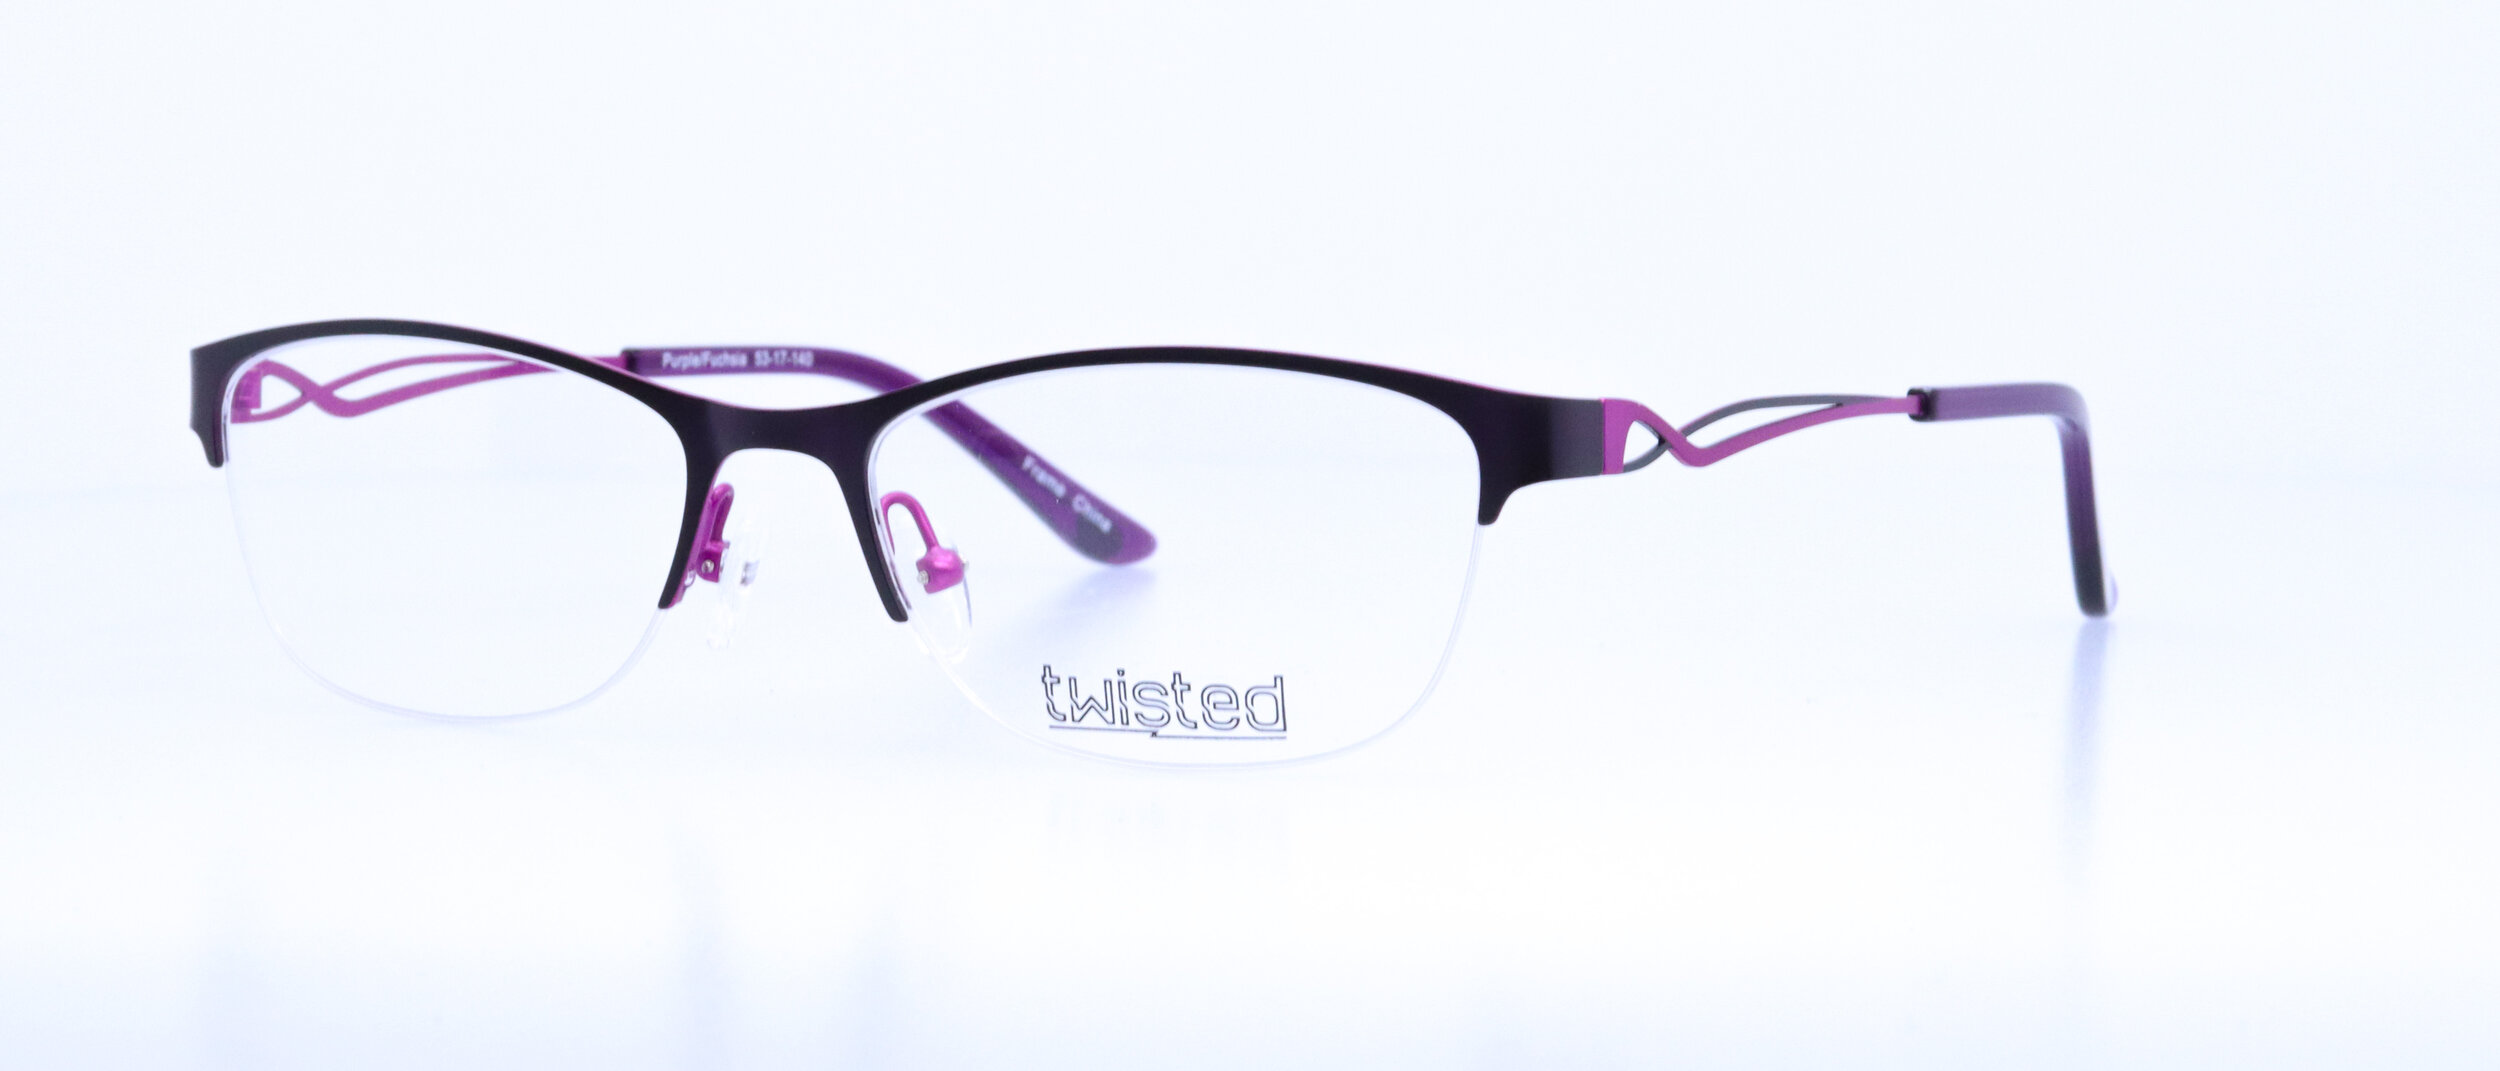  TW201: 53-17-140, Available in Purple/Fuchsia, Black/Red, or Brown/Turquoise 